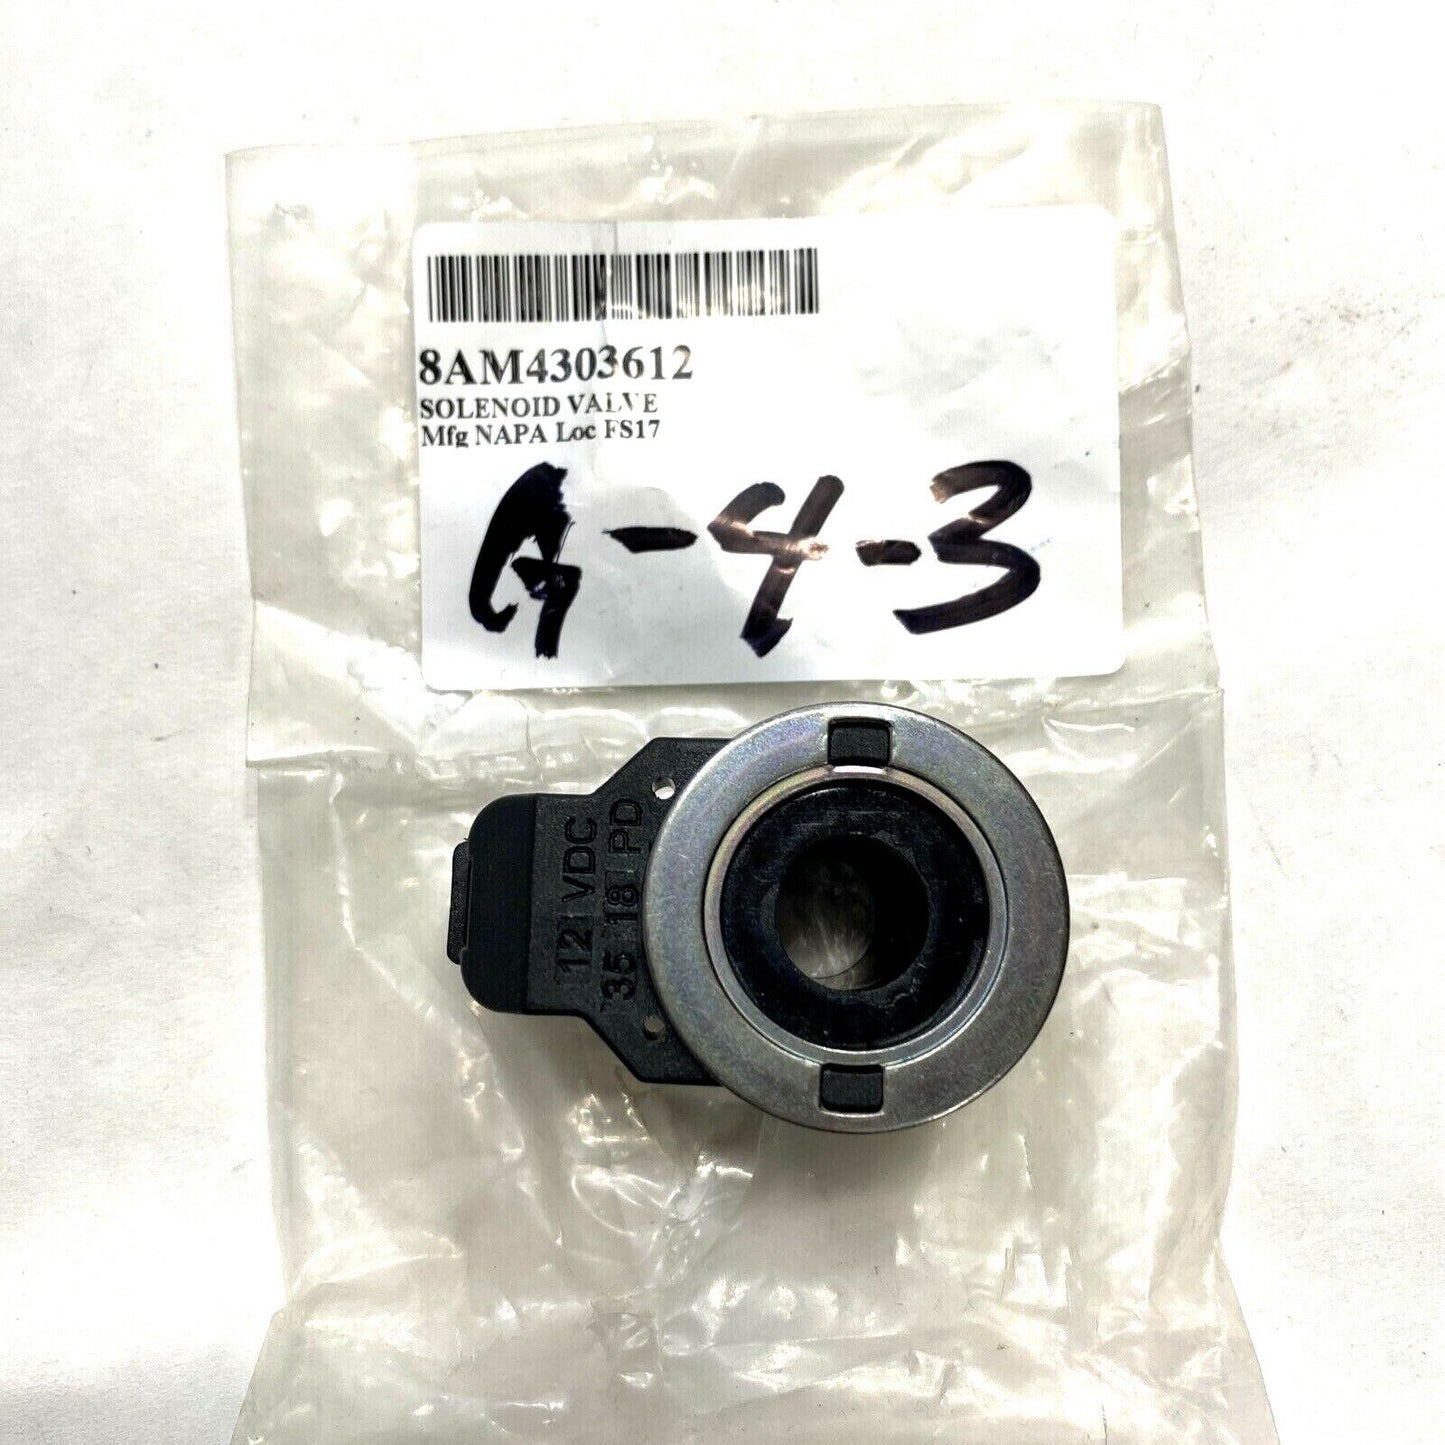 New Hydraforce Electrical Component - Coil / Solenoid C4303612